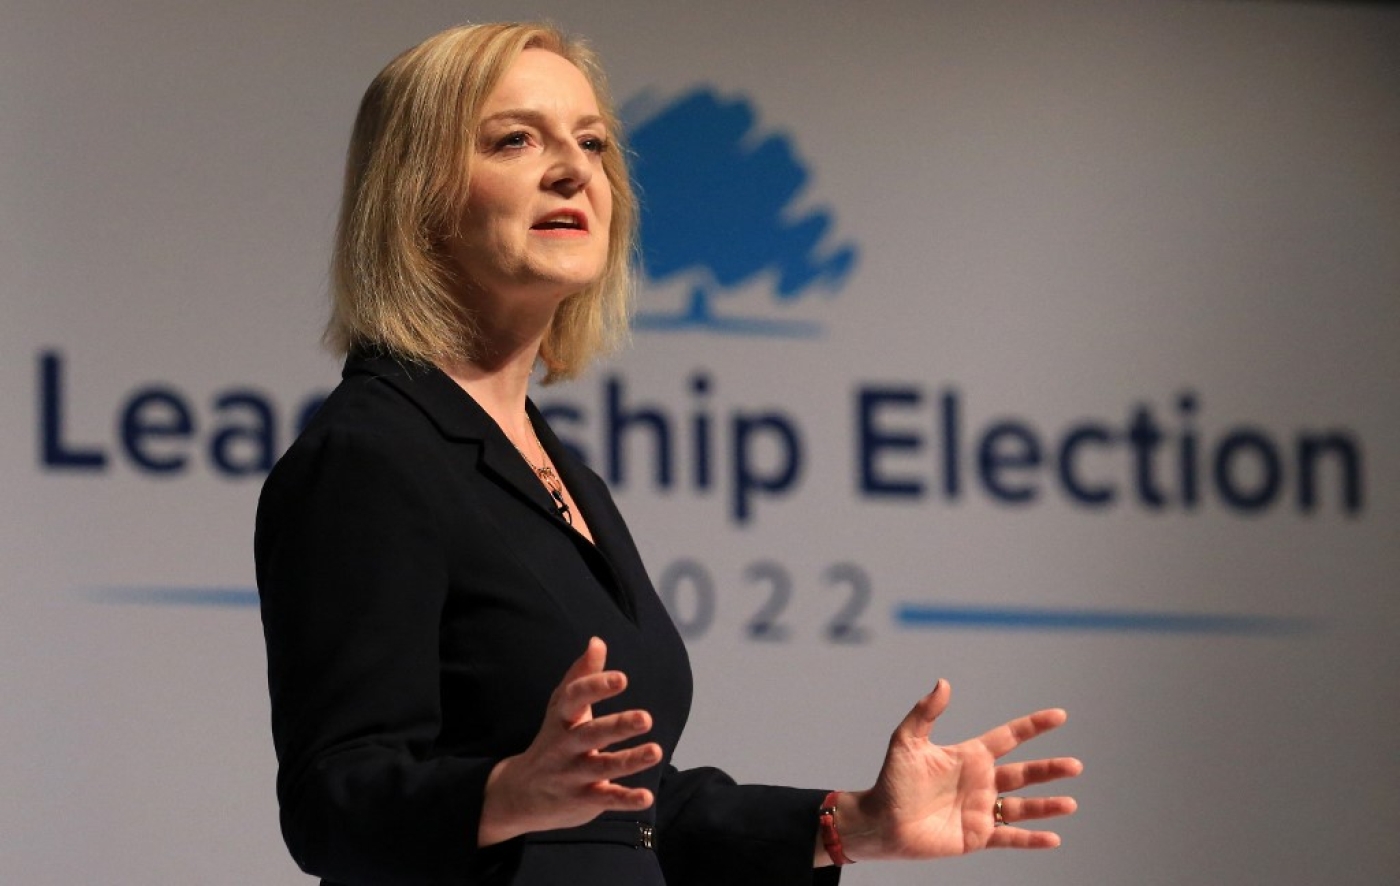 Britain's Foreign Secretary Liz Truss, a contender to become the country's next Prime Minister and leader of the Conservative party, speaks during a Conservative Party hustings event in Darlington, north east England on August 9, 2022 (AFP)